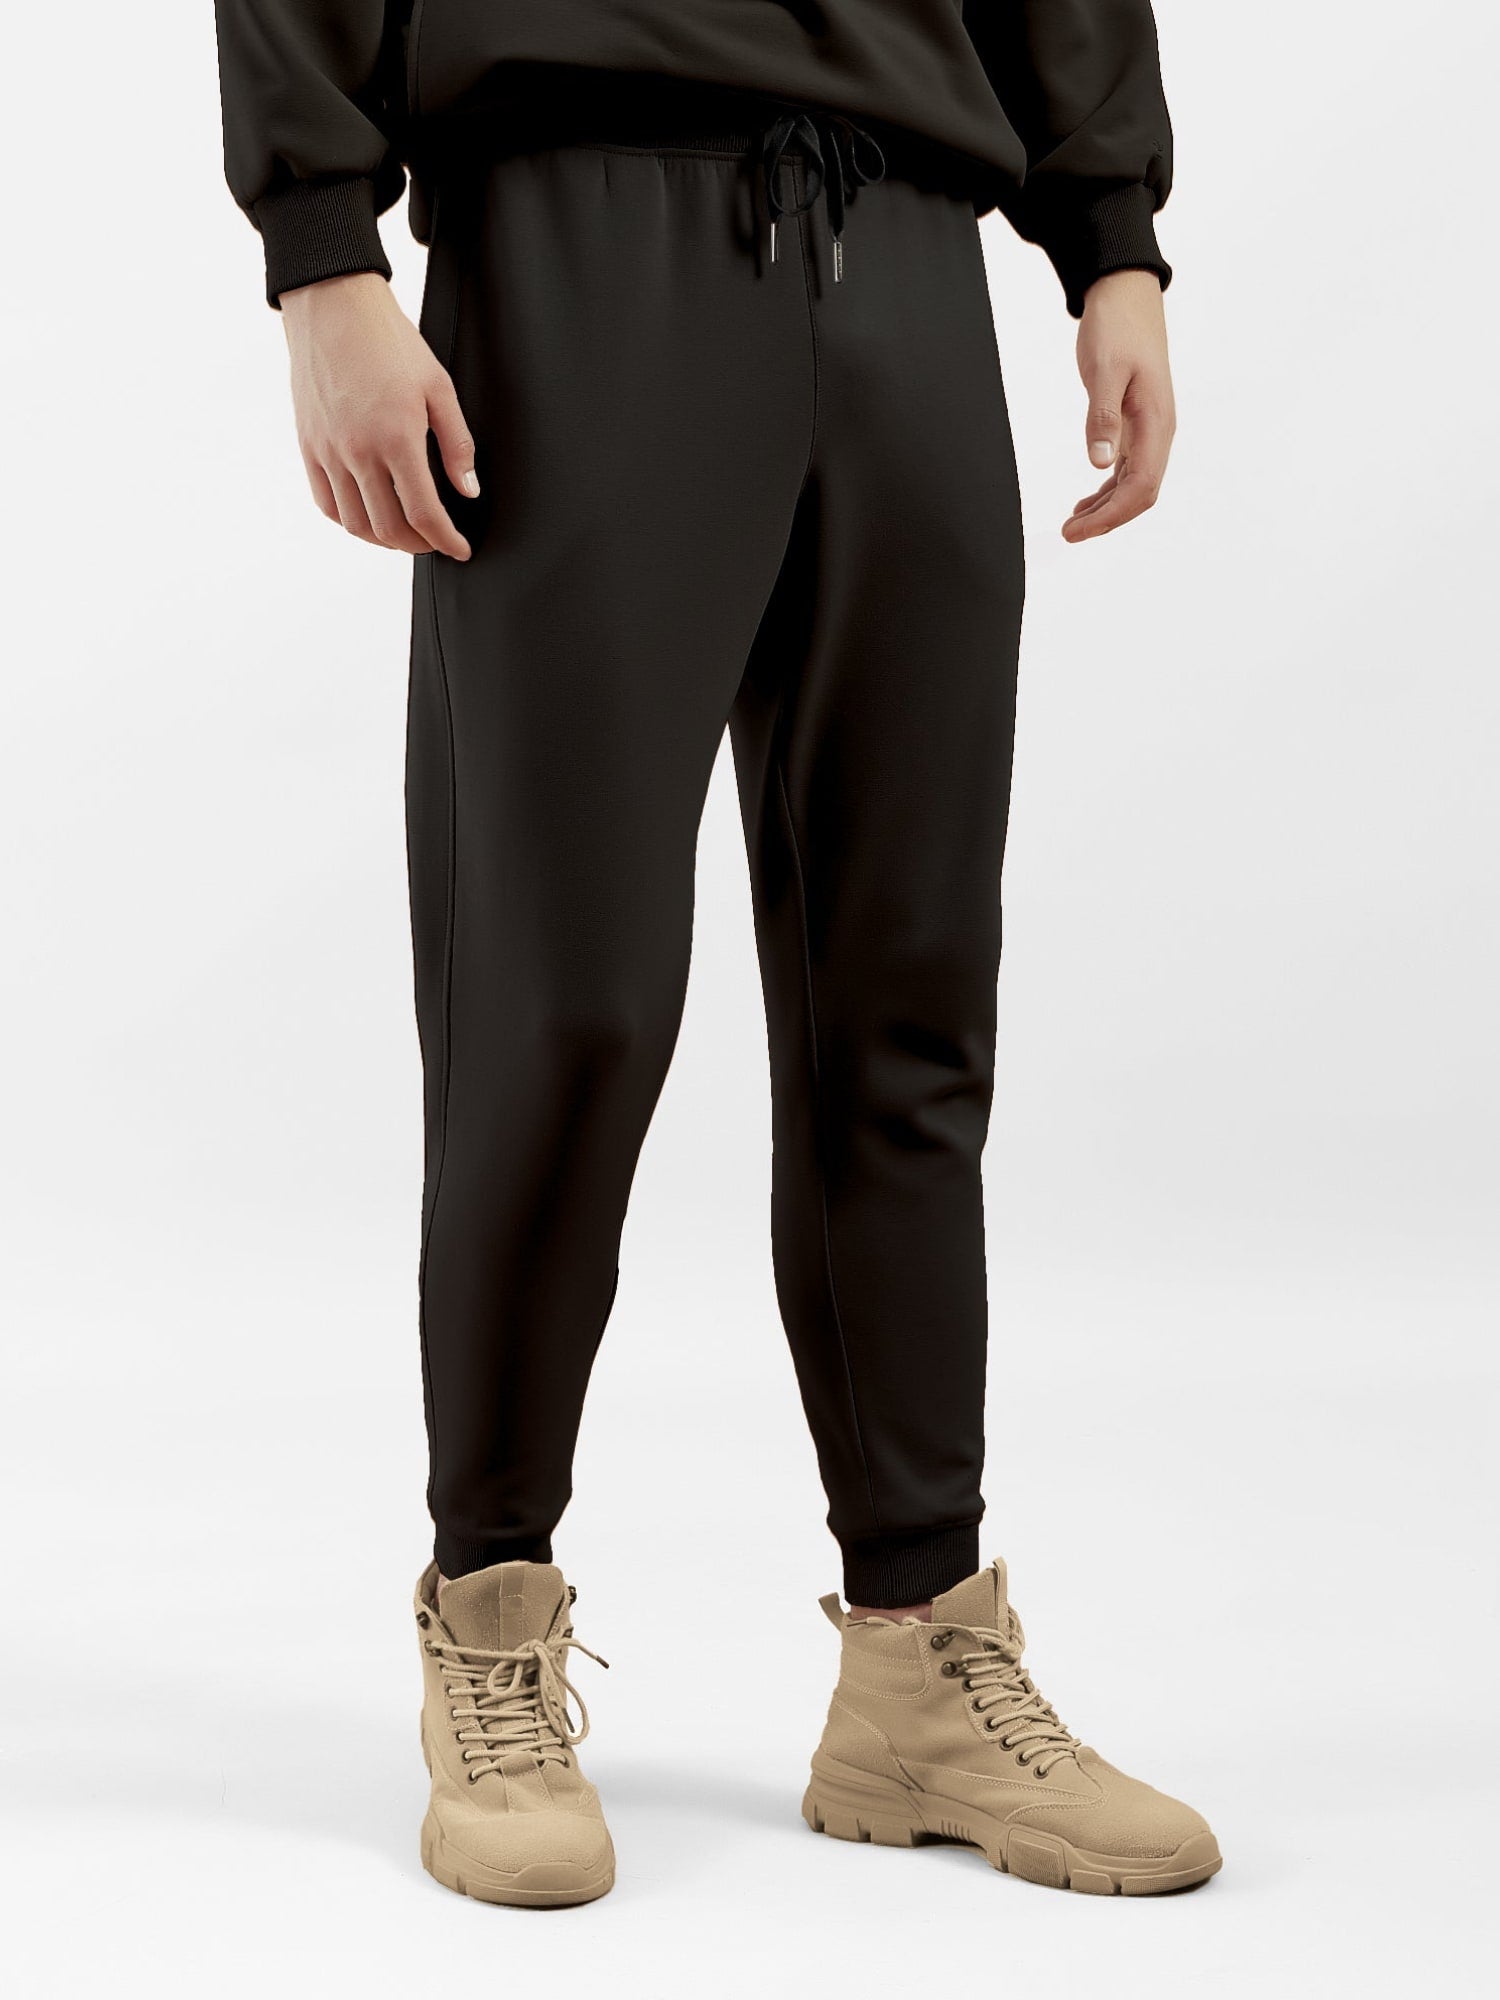 CLEAN FIT Joggers, Now with Back Zipper Pockets